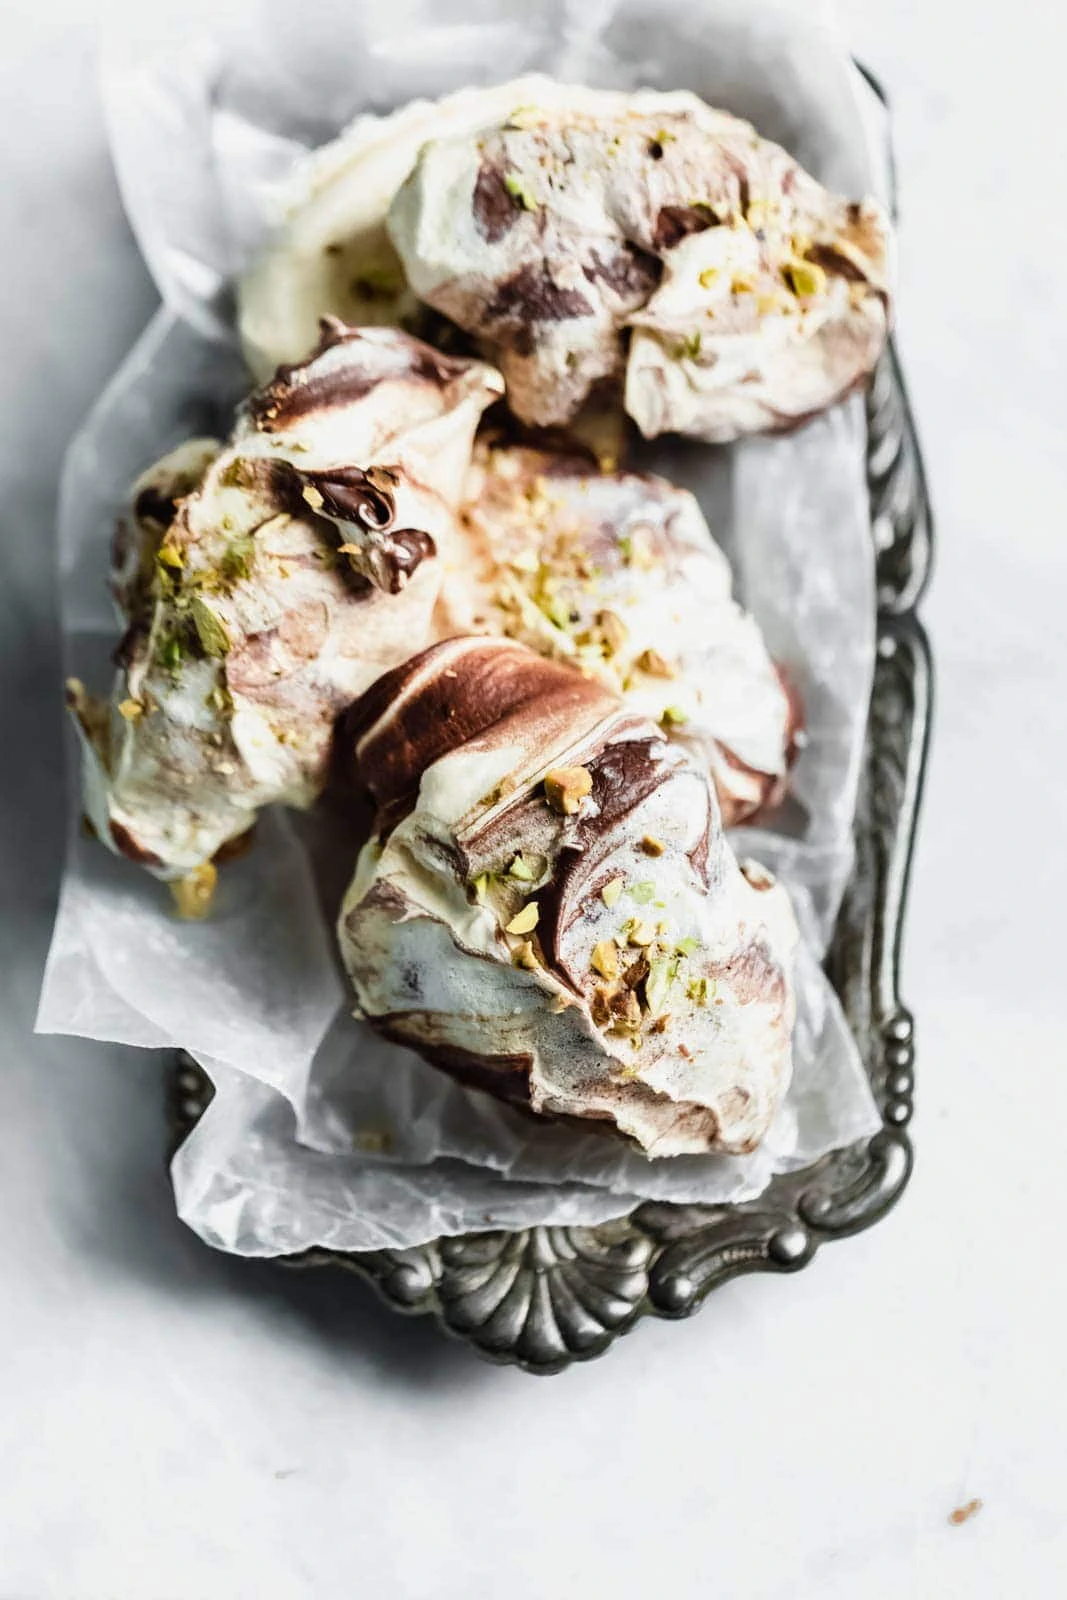 The easiest chocolate swirled spoon meringues that you literally spoon onto a baking sheet. Top 'em with crumbled pistachios, bake, and done!